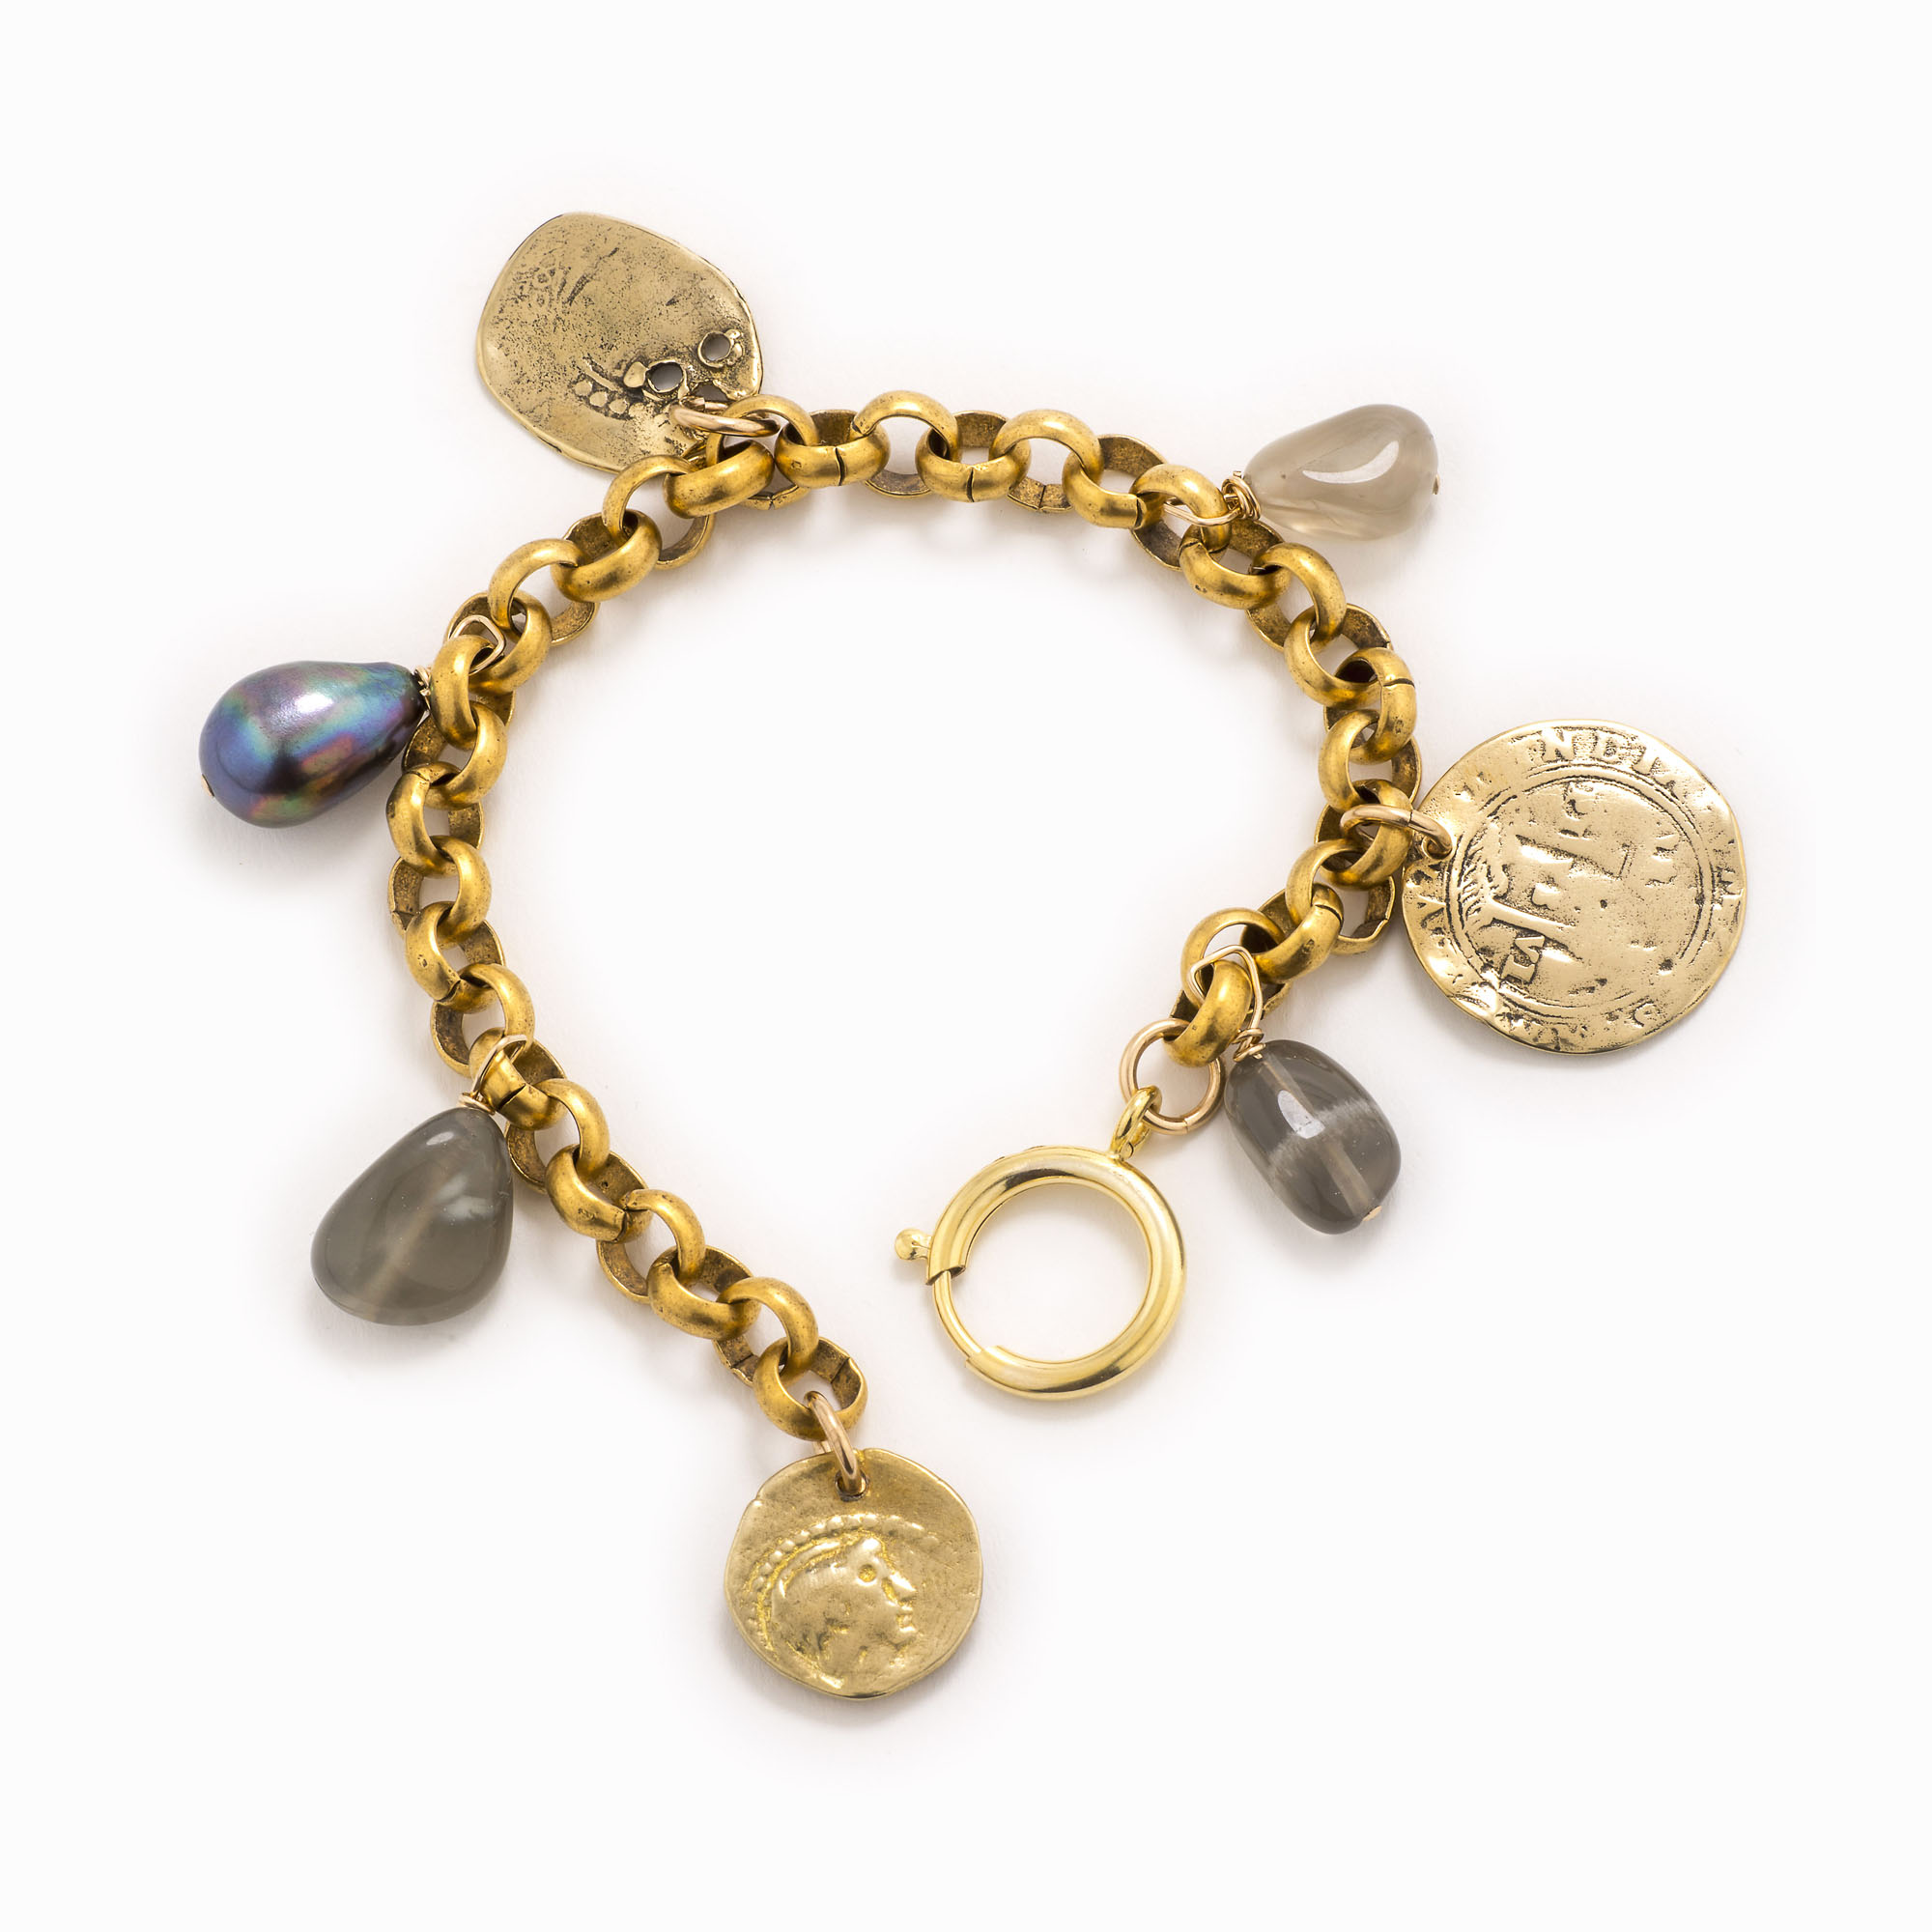 Featured image for “Katy Brass Bracelet”